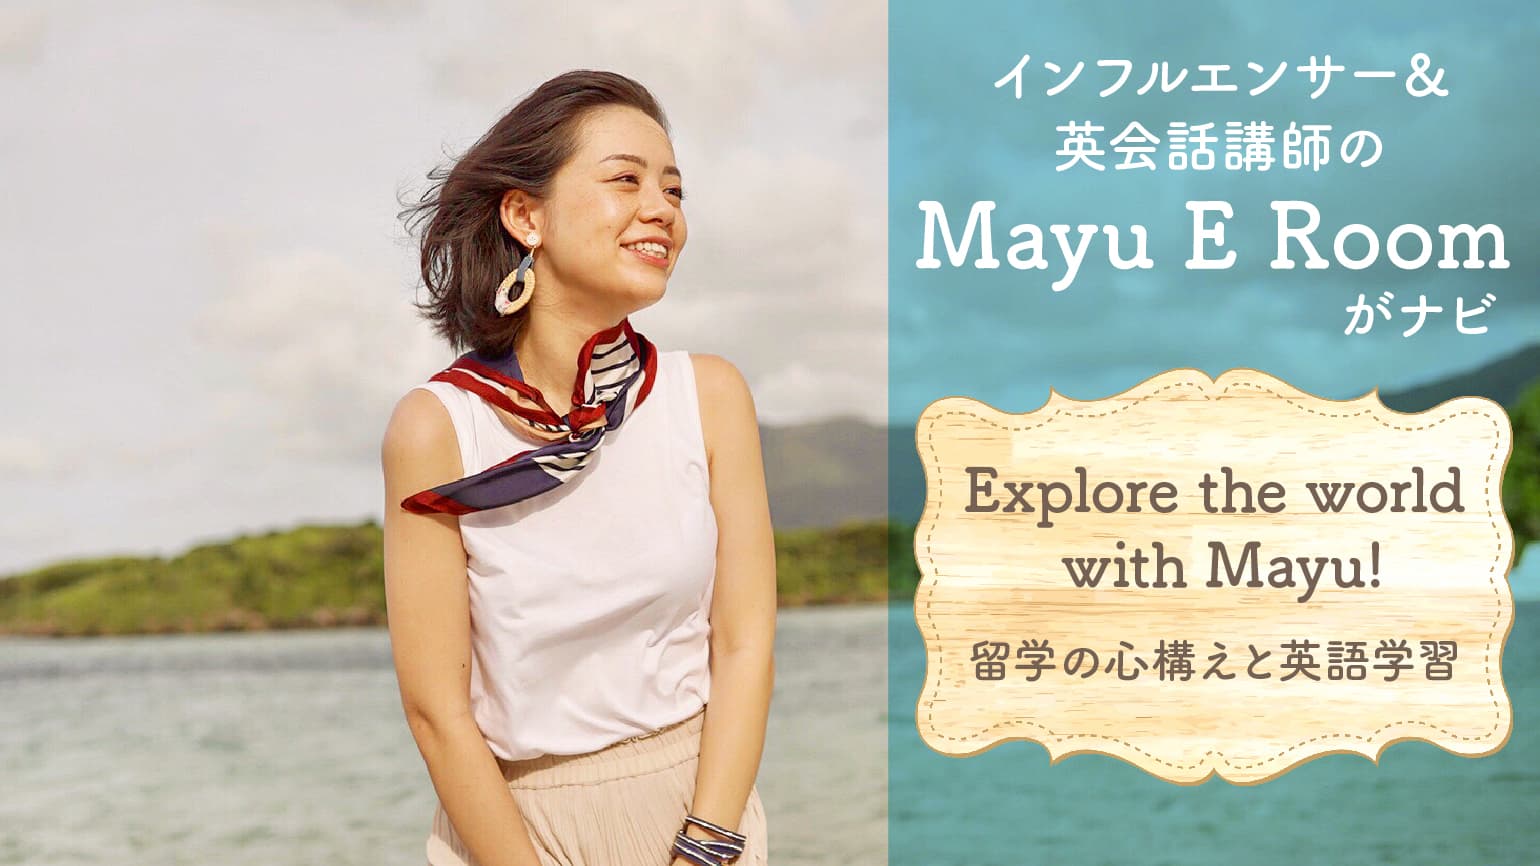 Explore the world with Mayu!